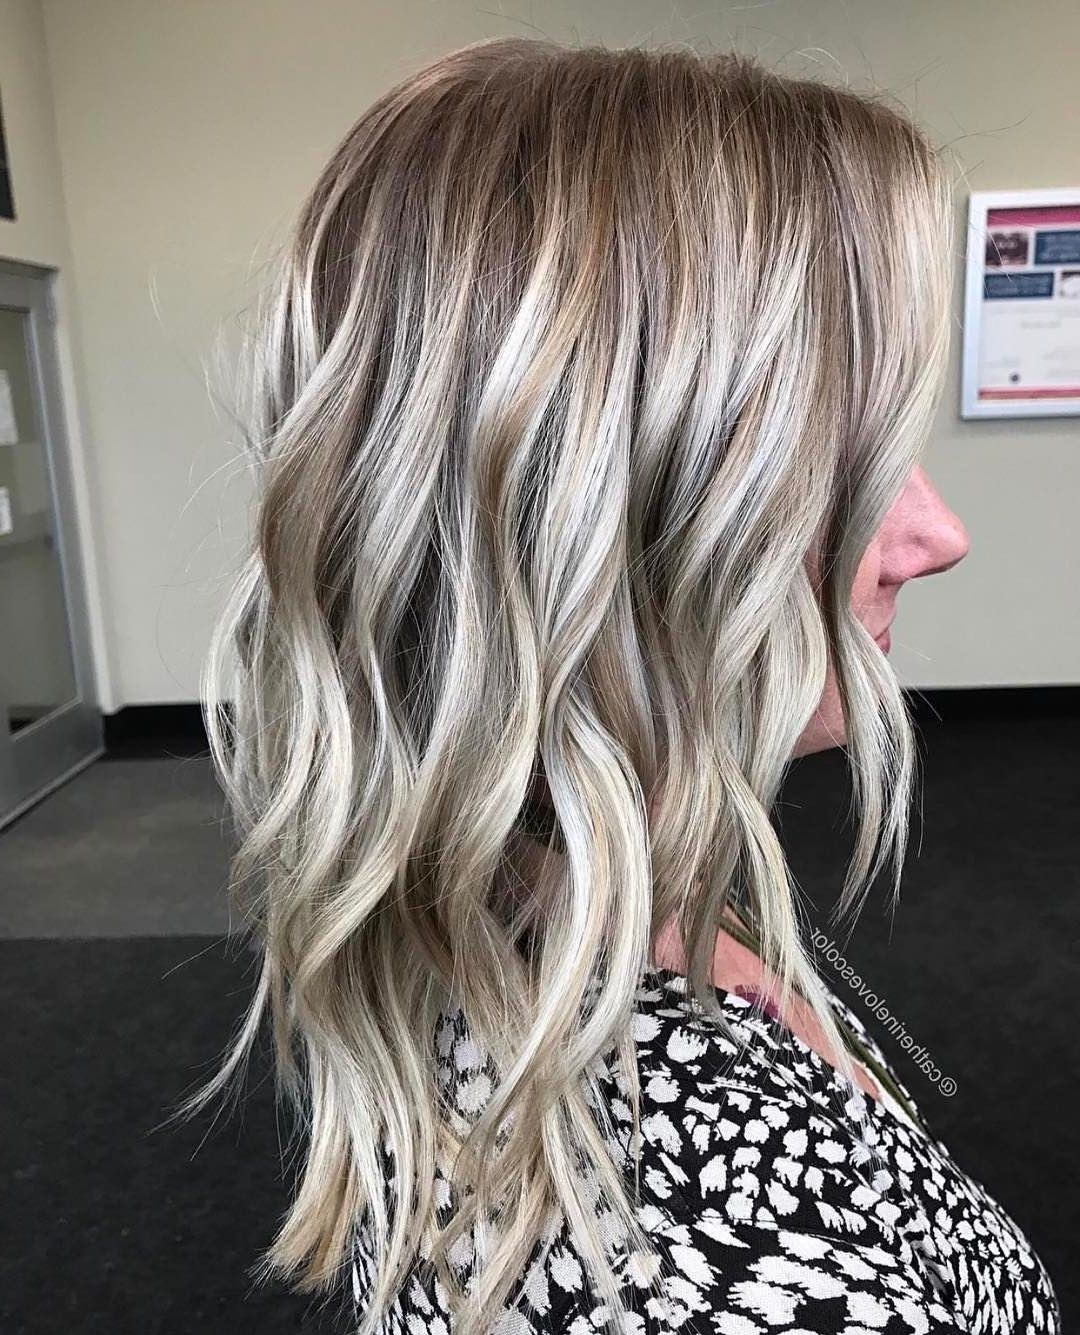 Well Known Rooty Long Bob Blonde Hairstyles With 20 Adorable Ash Blonde Hairstyles To Try: Hair Color Ideas  (View 7 of 20)